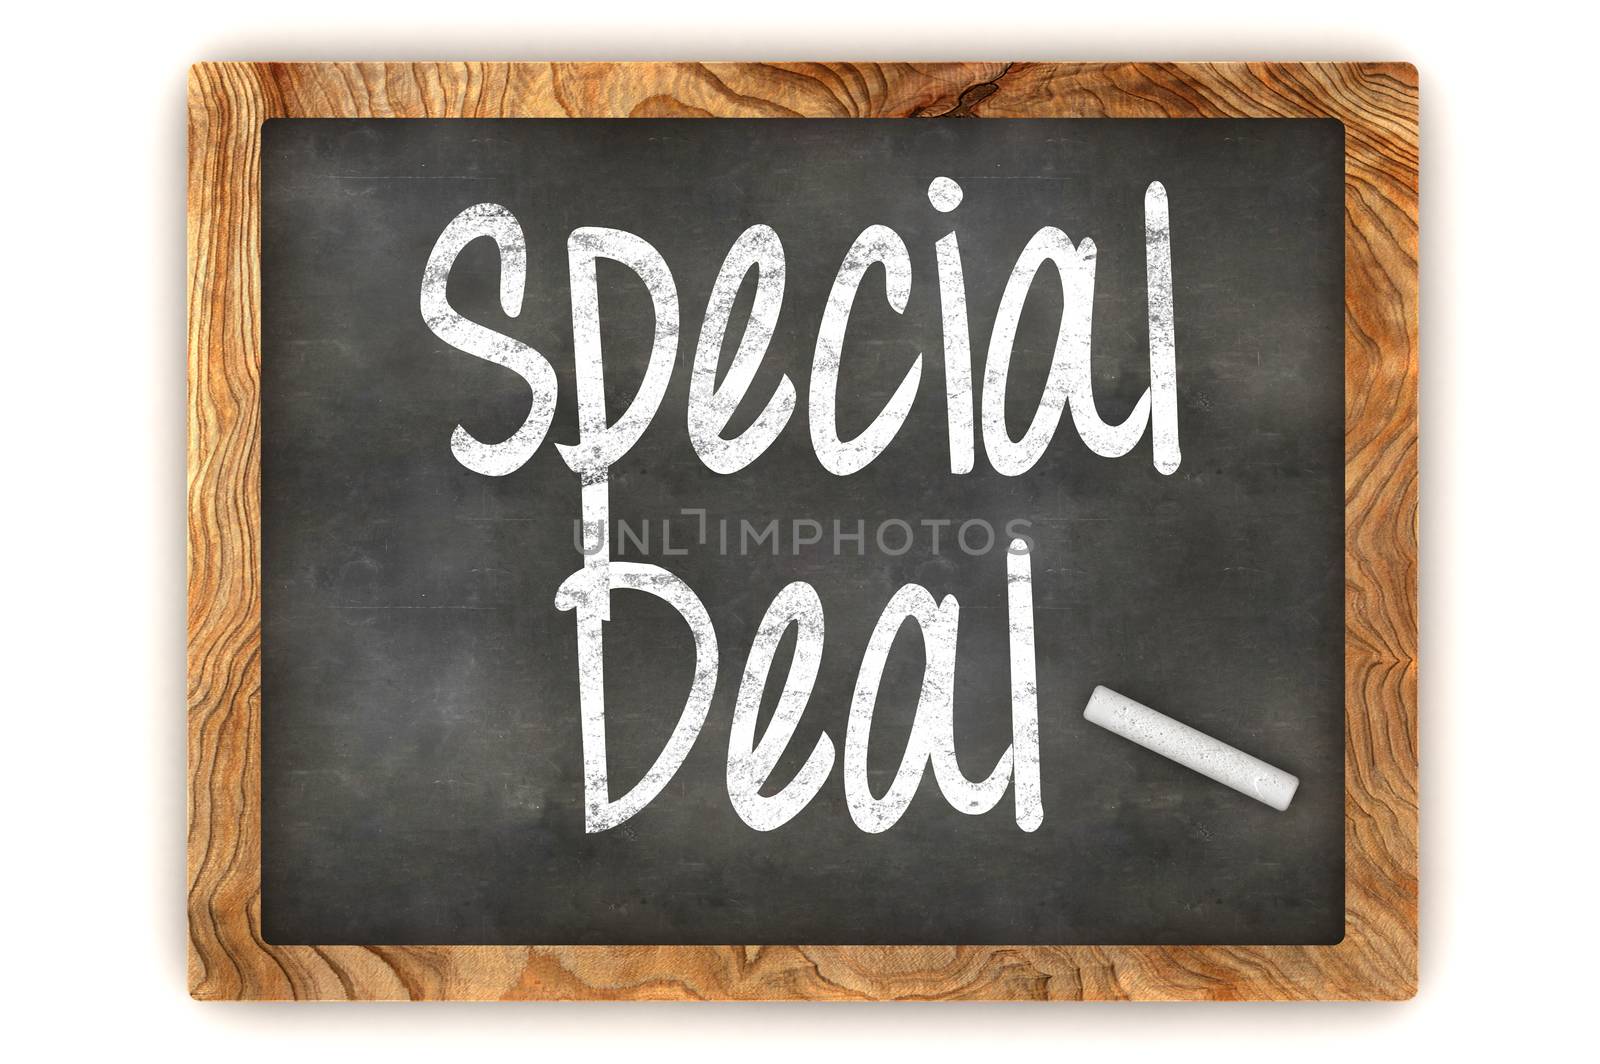 A Colourful 3d Rendered Blackboard Illustration Showing 'Special Deal'